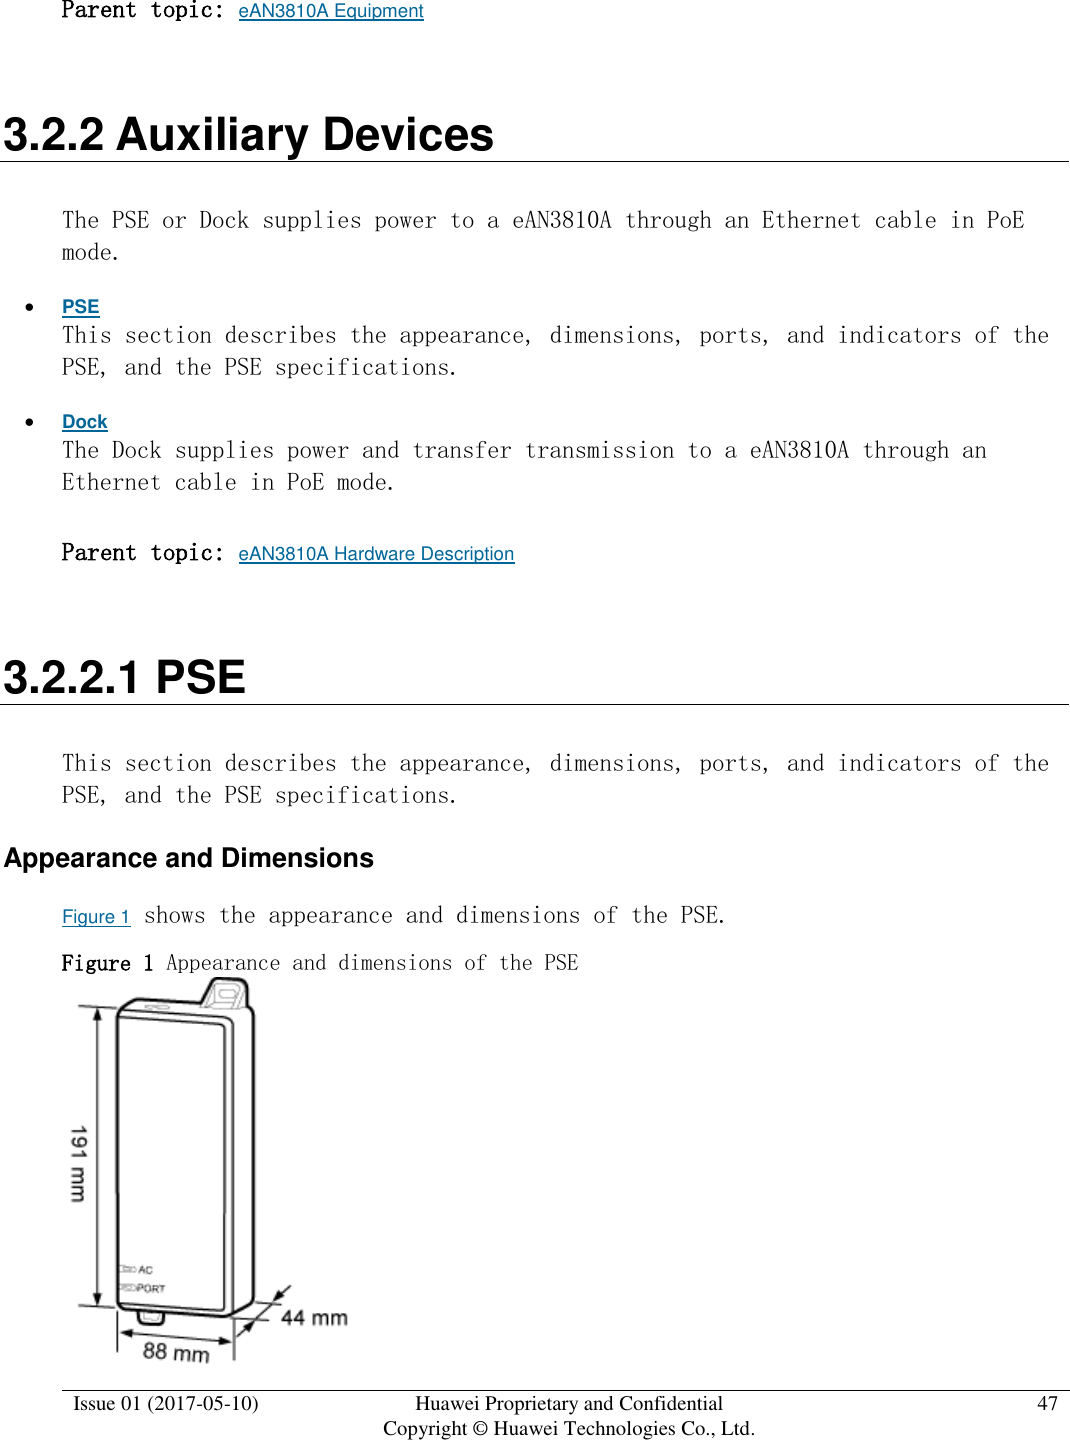  Issue 01 (2017-05-10) Huawei Proprietary and Confidential      Copyright © Huawei Technologies Co., Ltd. 47  Parent topic: eAN3810A Equipment 3.2.2 Auxiliary Devices The PSE or Dock supplies power to a eAN3810A through an Ethernet cable in PoE mode.  PSE This section describes the appearance, dimensions, ports, and indicators of the PSE, and the PSE specifications.   Dock The Dock supplies power and transfer transmission to a eAN3810A through an Ethernet cable in PoE mode. Parent topic: eAN3810A Hardware Description 3.2.2.1 PSE This section describes the appearance, dimensions, ports, and indicators of the PSE, and the PSE specifications.  Appearance and Dimensions Figure 1 shows the appearance and dimensions of the PSE. Figure 1 Appearance and dimensions of the PSE   